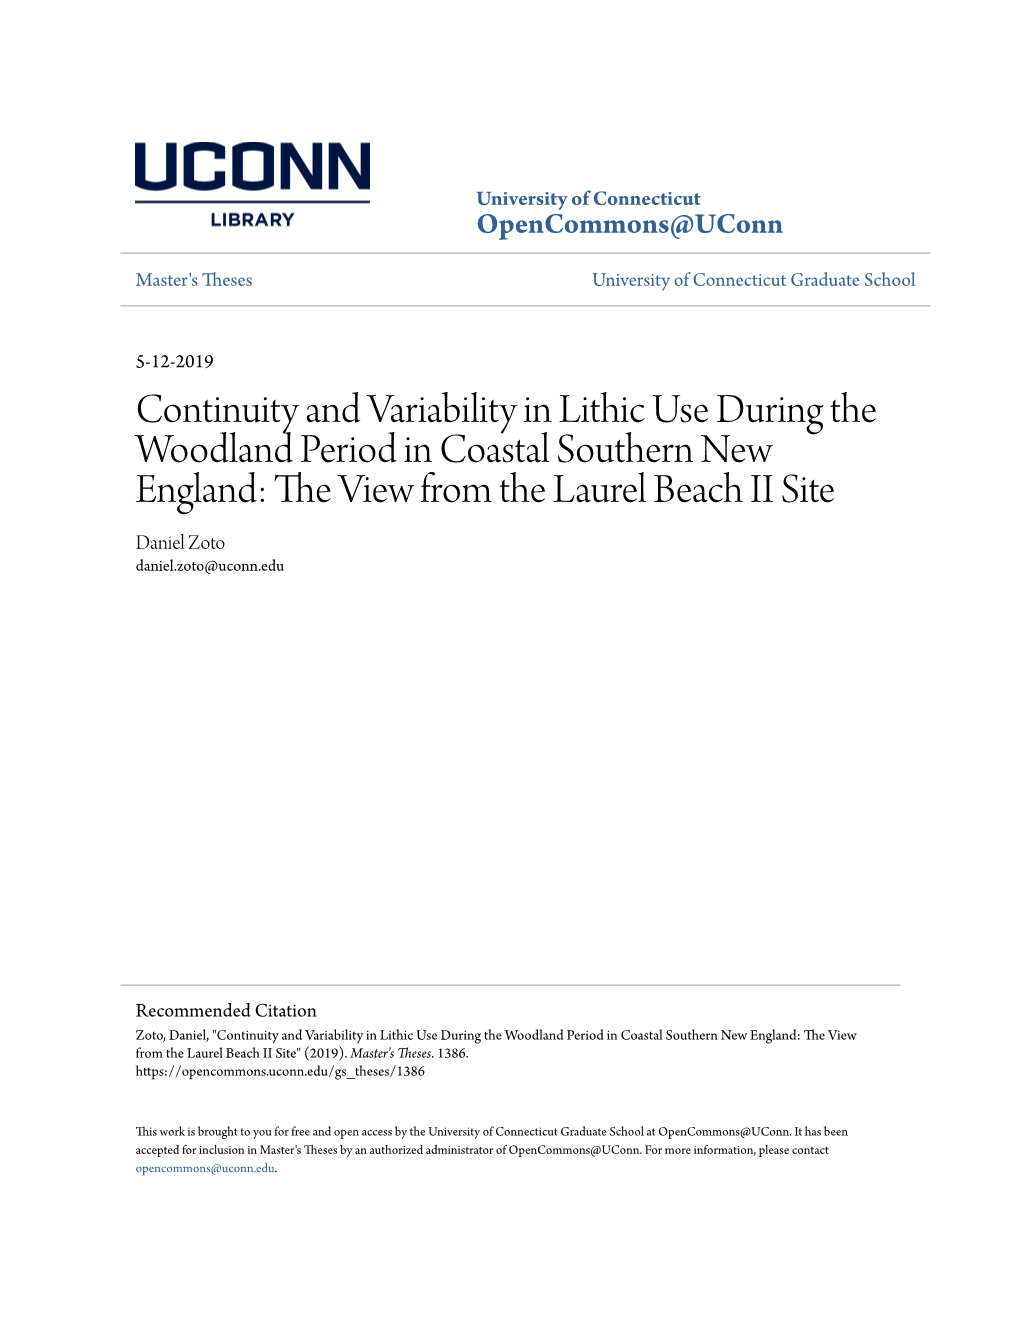 Continuity and Variability in Lithic Use During the Woodland Period In